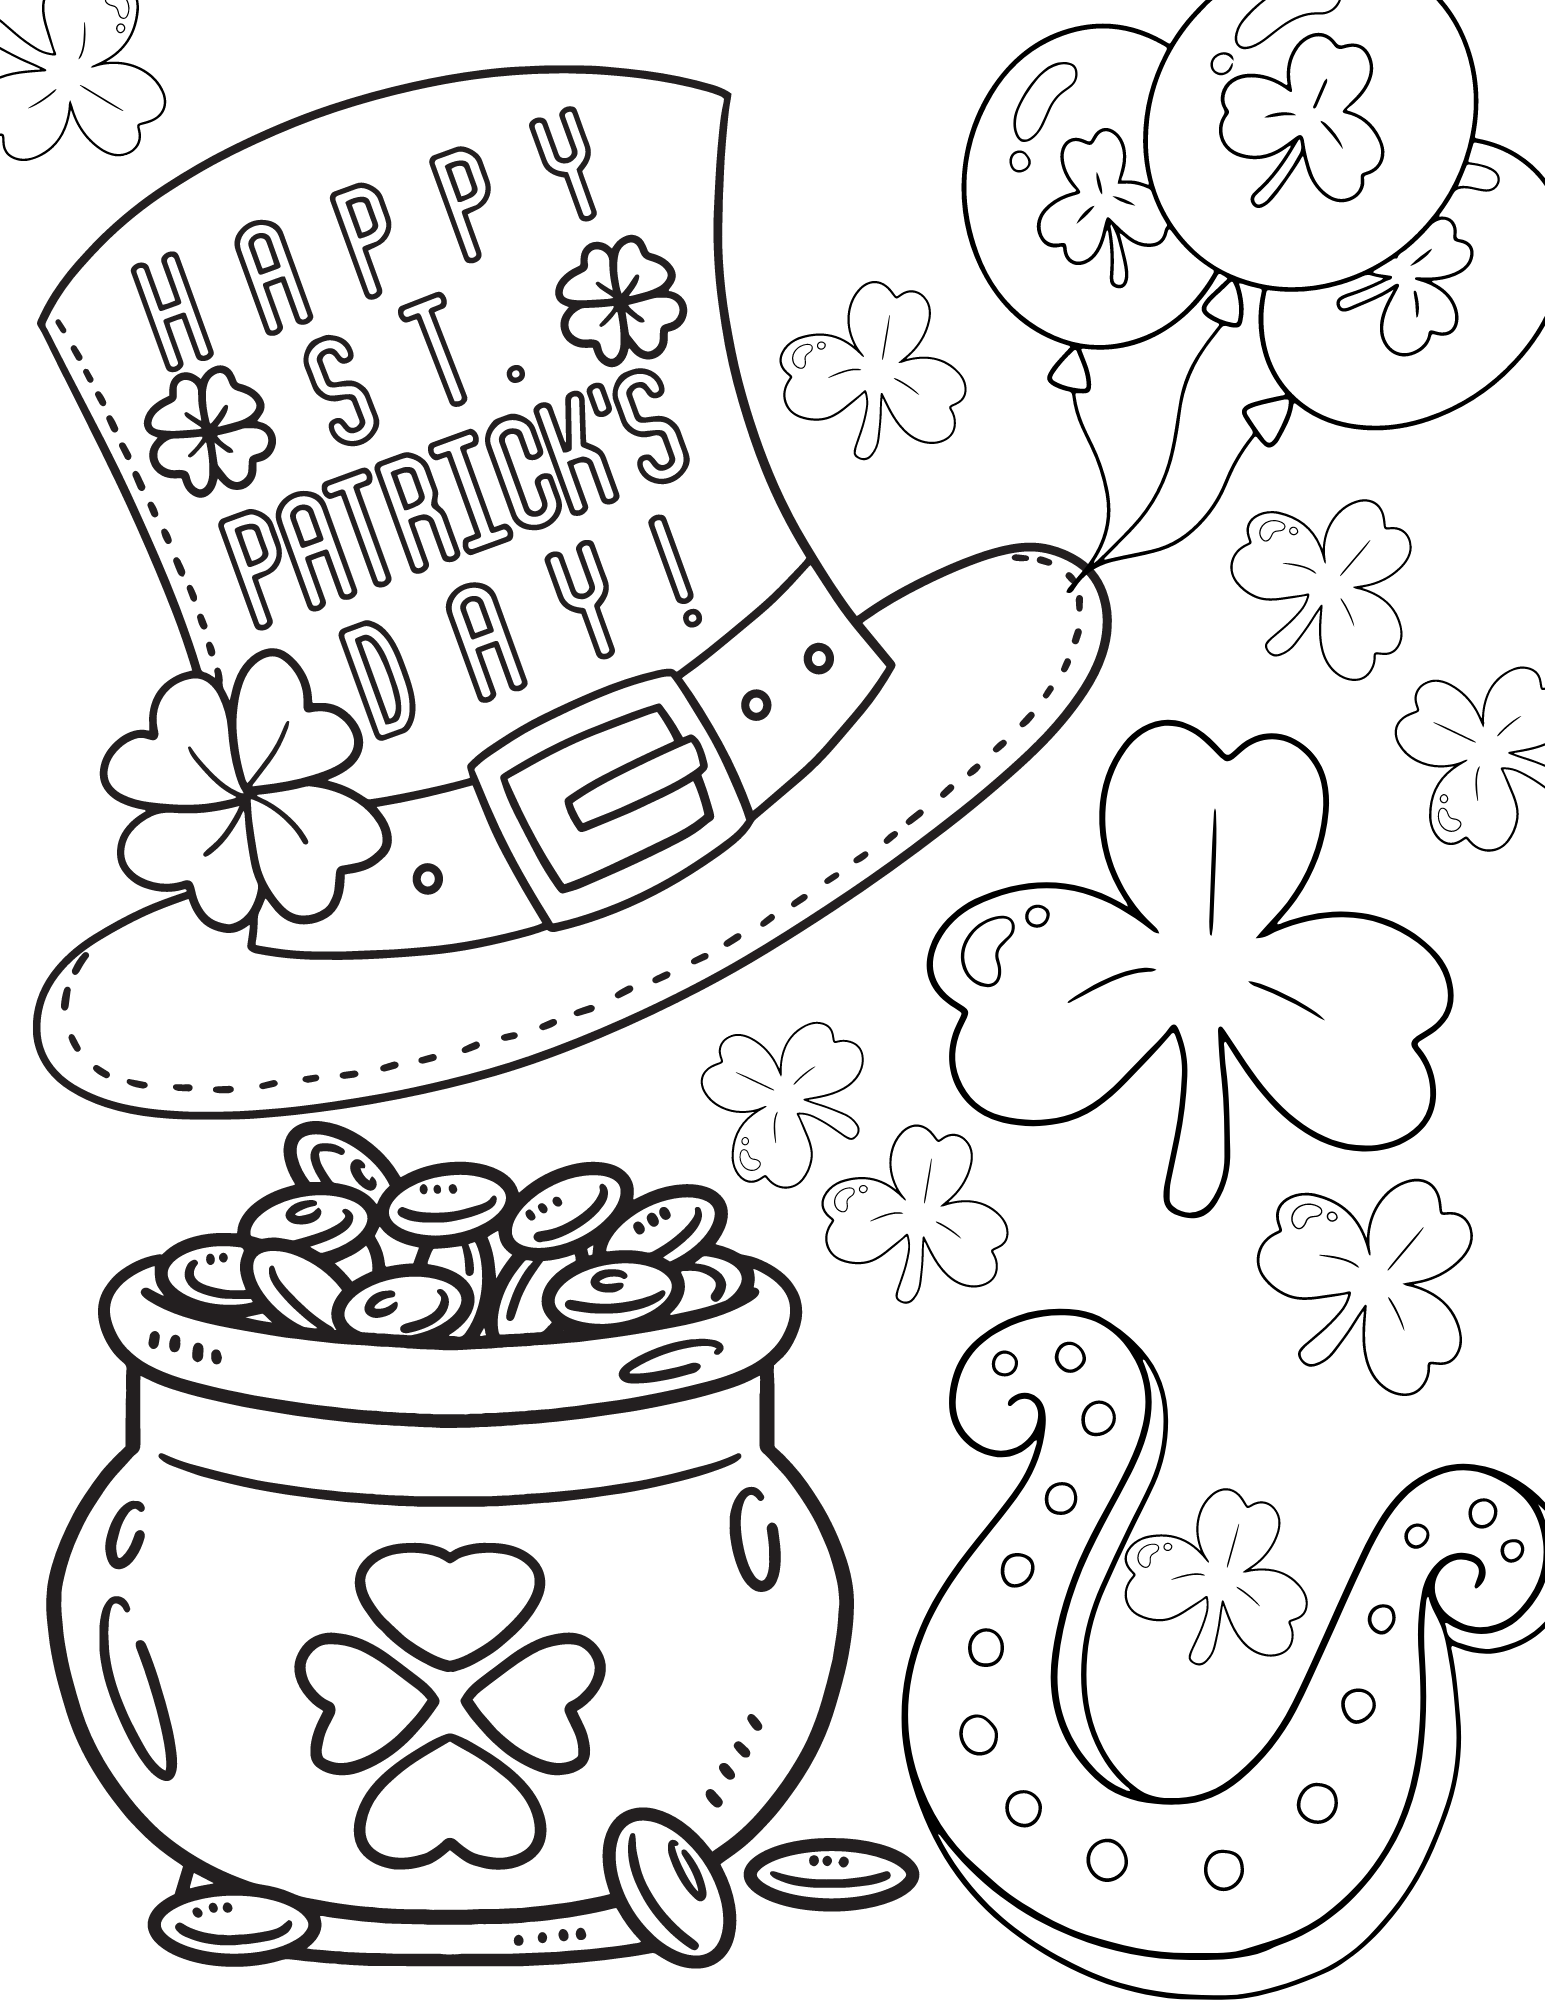 Free printable st patricks day coloring pages for kids and adults